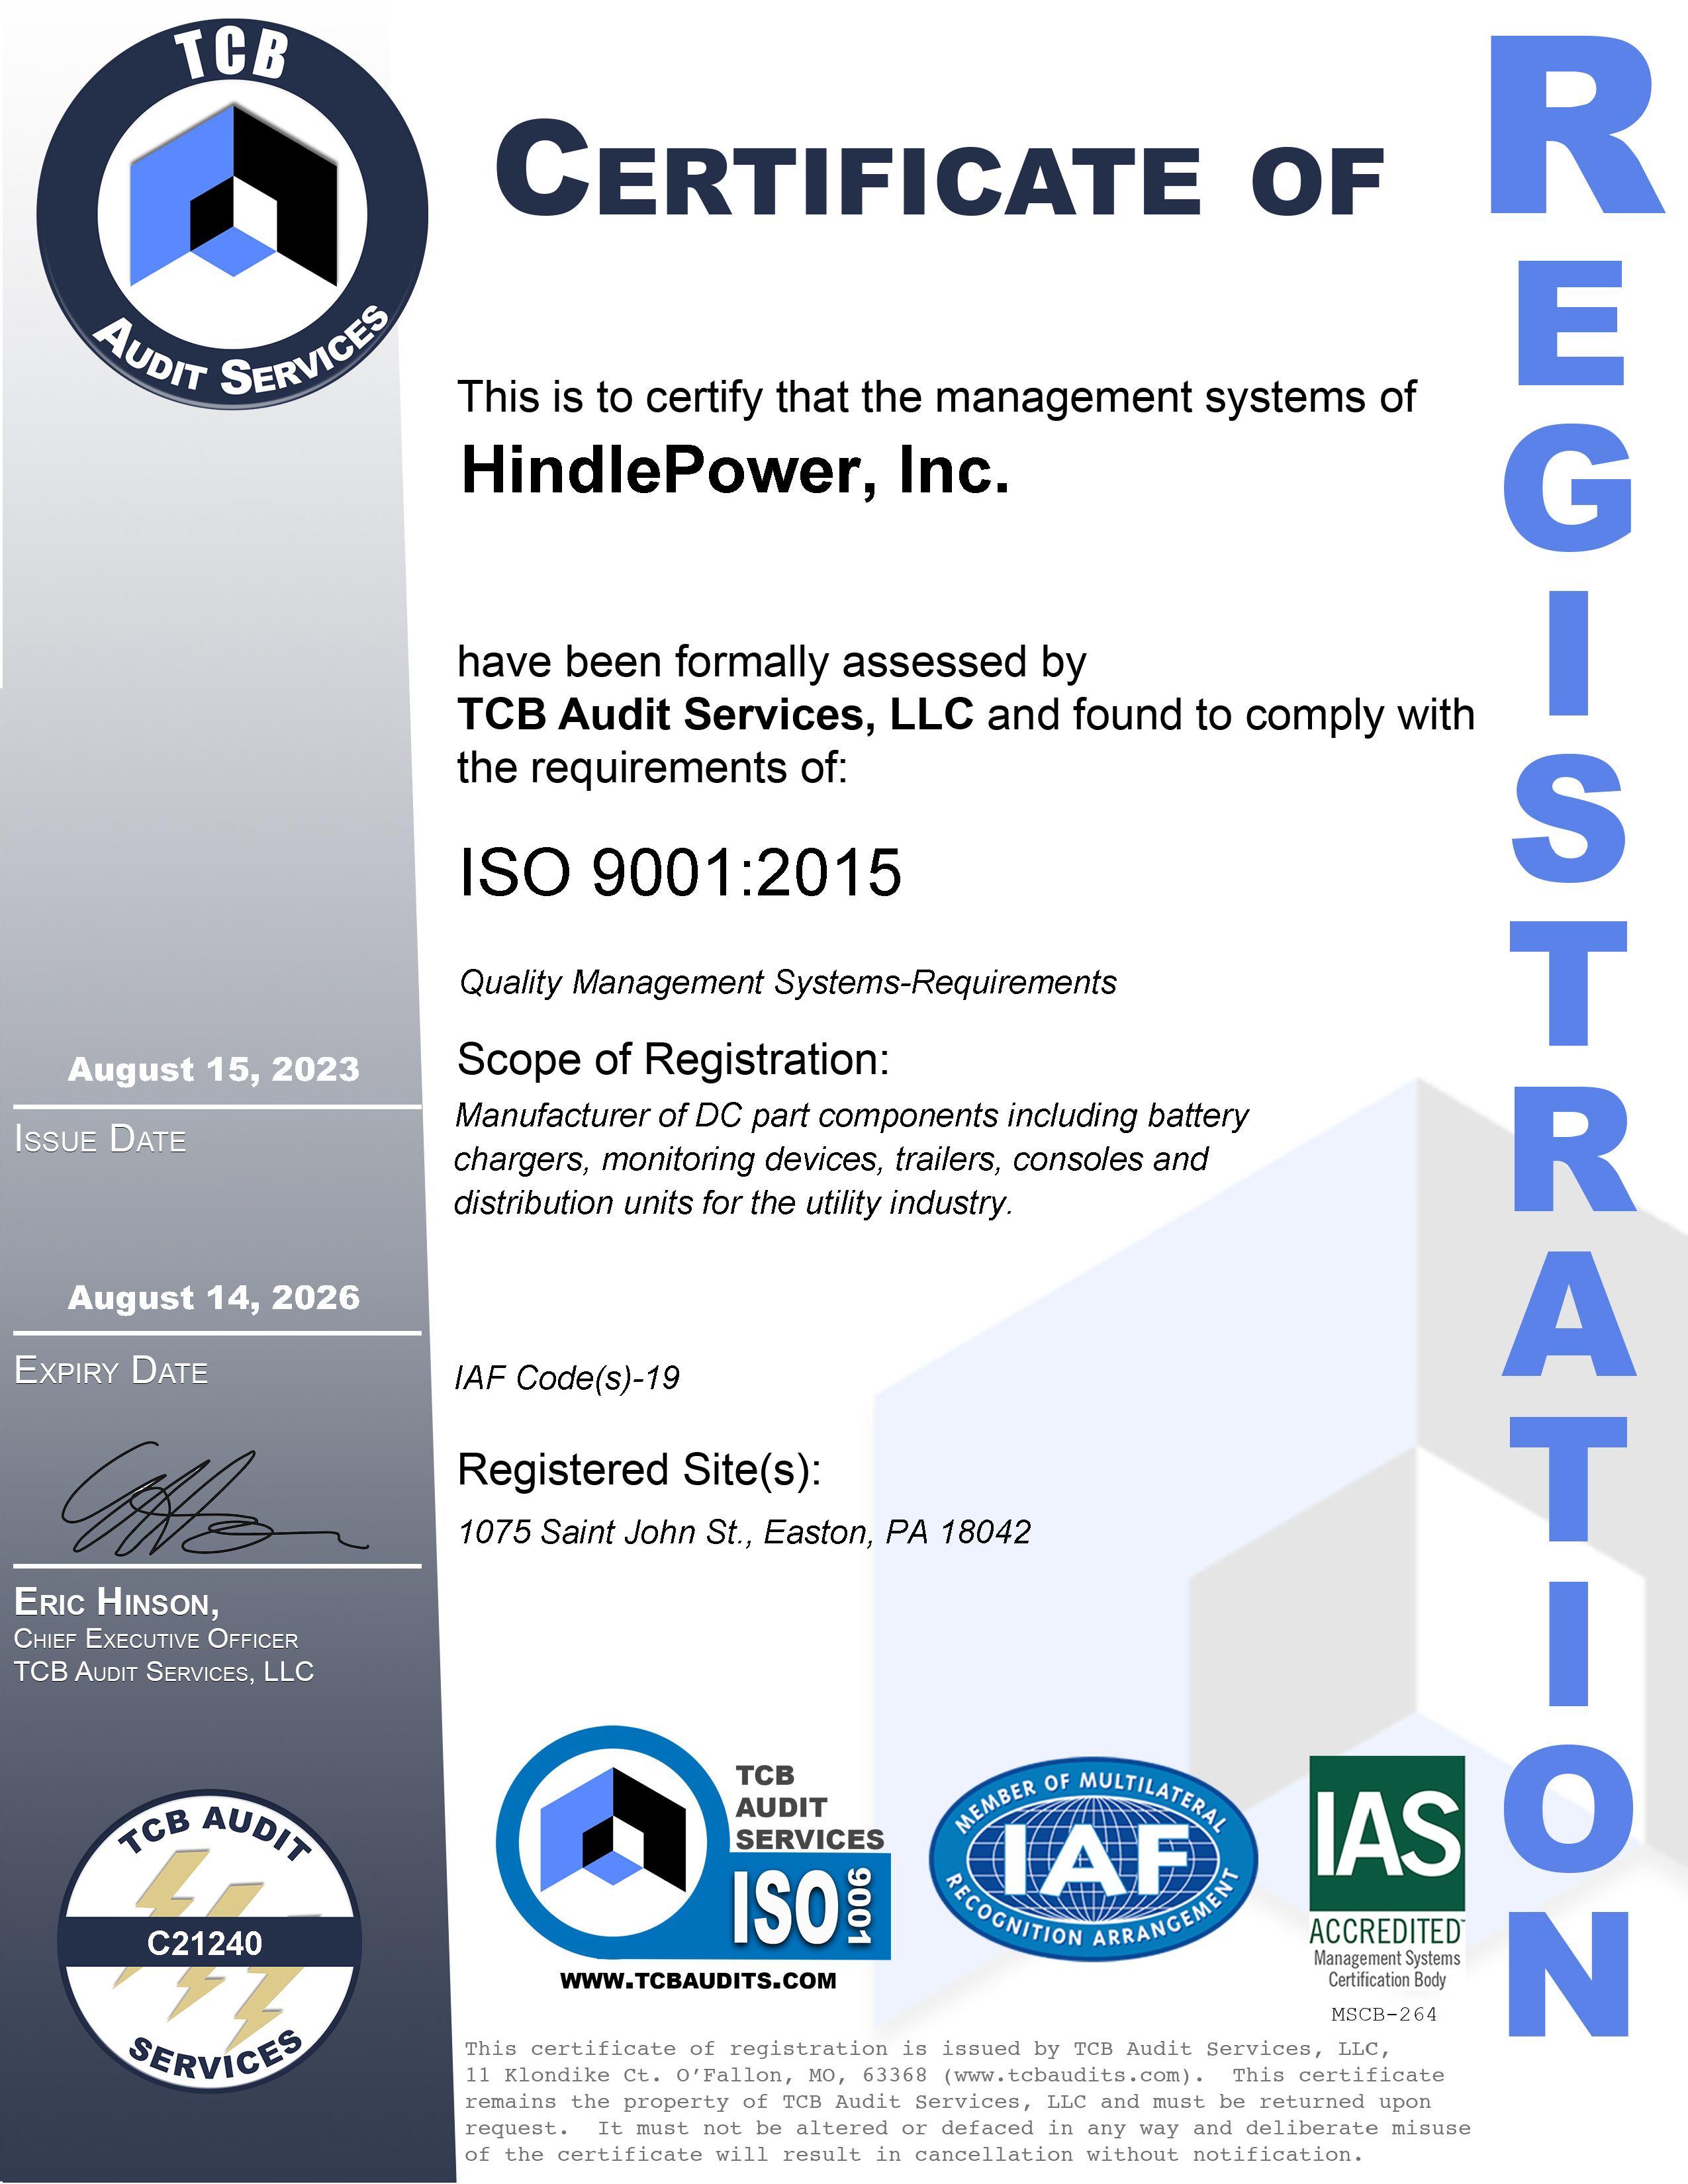 Hindlepower ISO 9001 Certification[74]